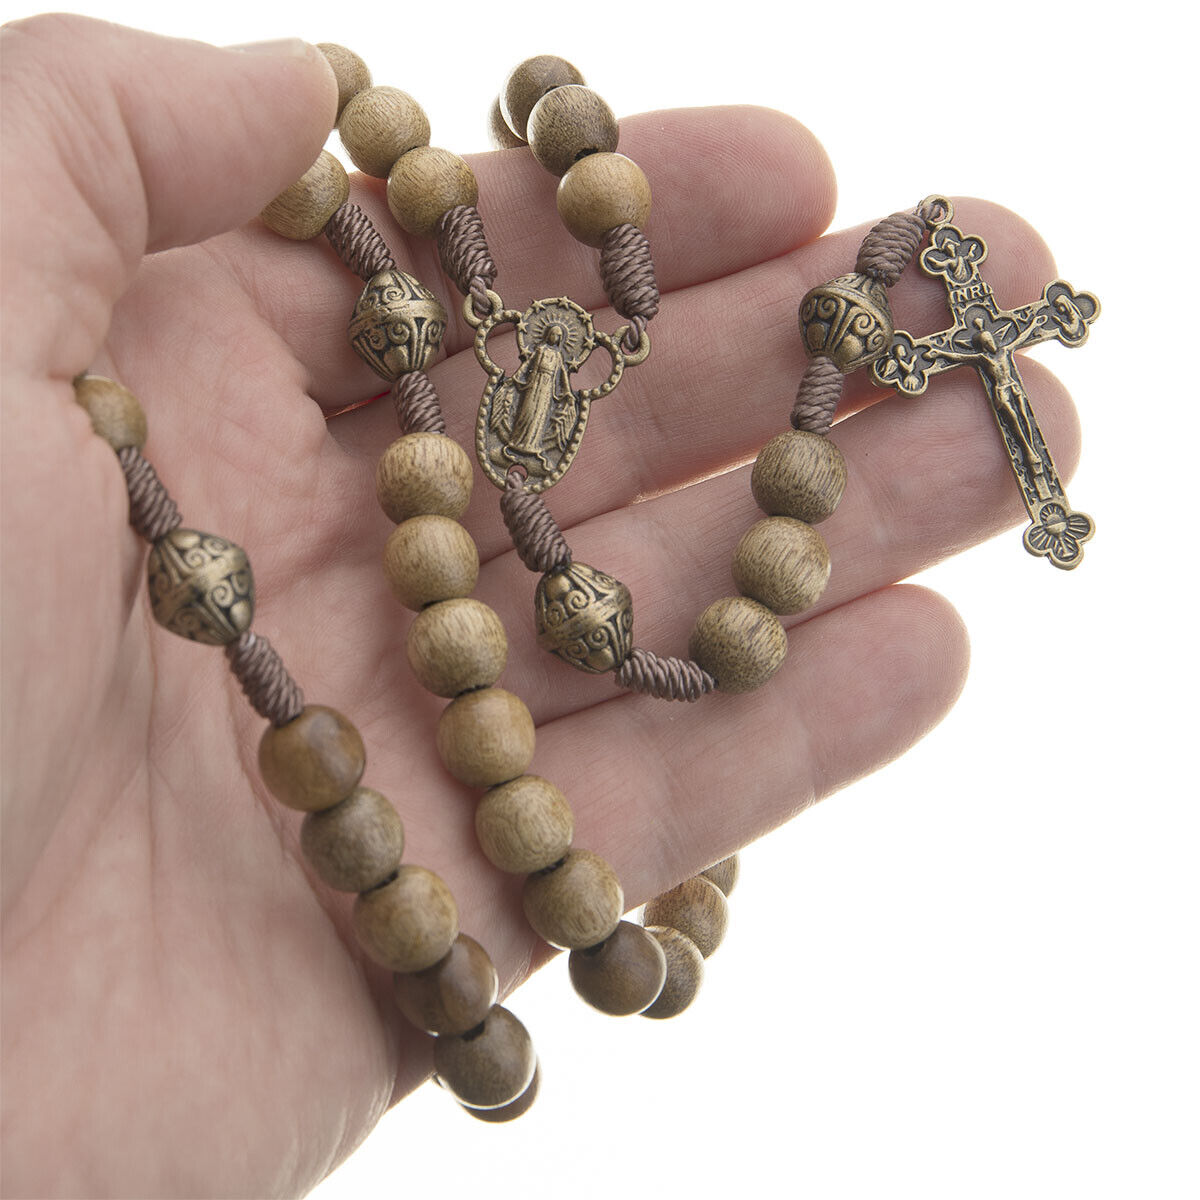 Catholic Rosary Beads Wood Strong Cord Miraculous Center Men Women Brown